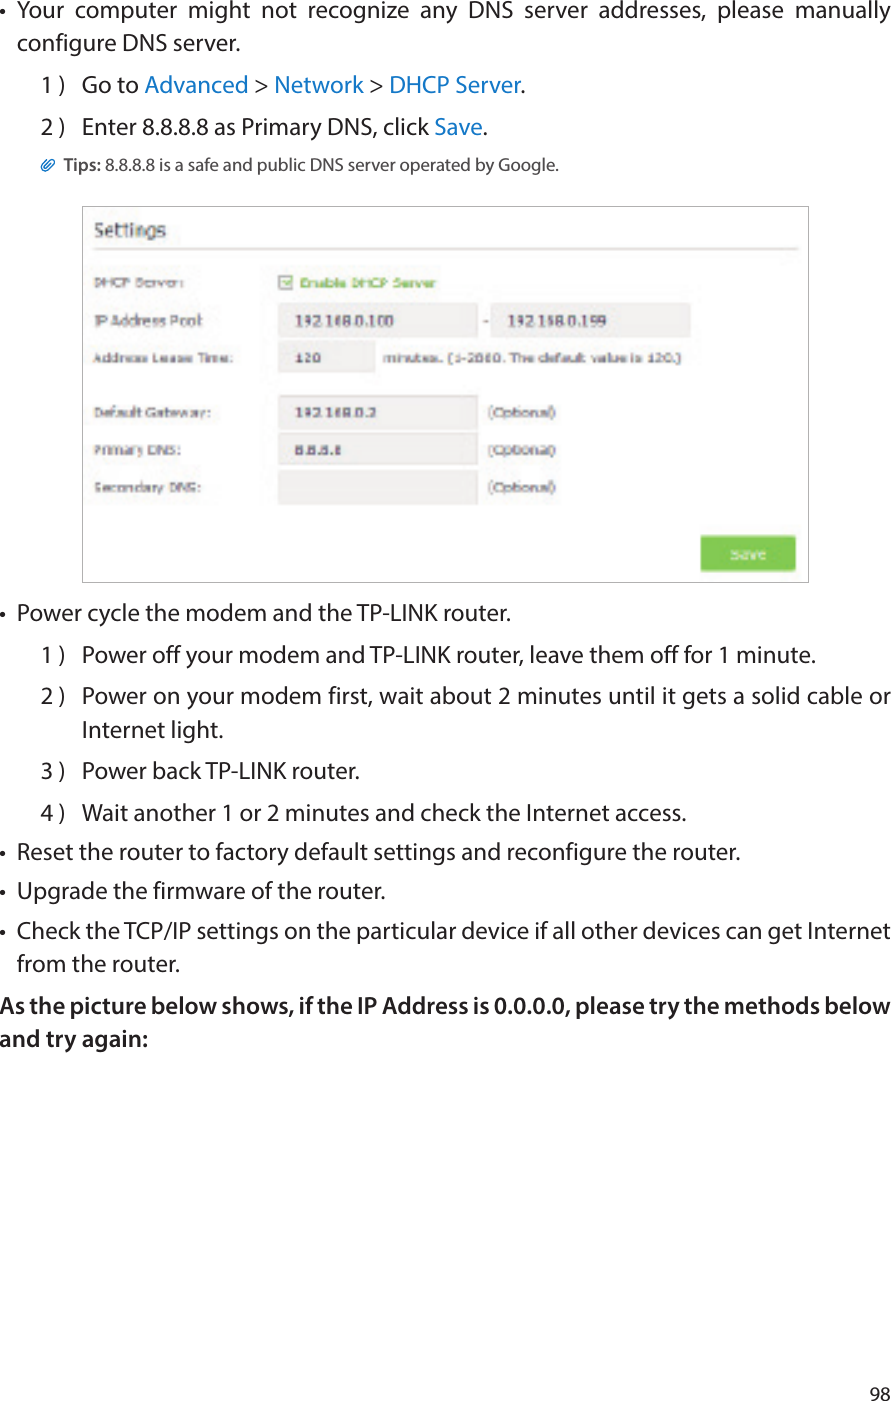 98•  Your computer might not recognize any DNS server addresses, please manually configure DNS server.1 )  Go to Advanced &gt; Network &gt; DHCP Server.2 )  Enter 8.8.8.8 as Primary DNS, click Save. Tips: 8.8.8.8 is a safe and public DNS server operated by Google.•  Power cycle the modem and the TP-LINK router.1 )  Power off your modem and TP-LINK router, leave them off for 1 minute.2 )  Power on your modem first, wait about 2 minutes until it gets a solid cable or Internet light.3 )  Power back TP-LINK router.4 )  Wait another 1 or 2 minutes and check the Internet access.•  Reset the router to factory default settings and reconfigure the router.•  Upgrade the firmware of the router.•  Check the TCP/IP settings on the particular device if all other devices can get Internet from the router.As the picture below shows, if the IP Address is 0.0.0.0, please try the methods below and try again: